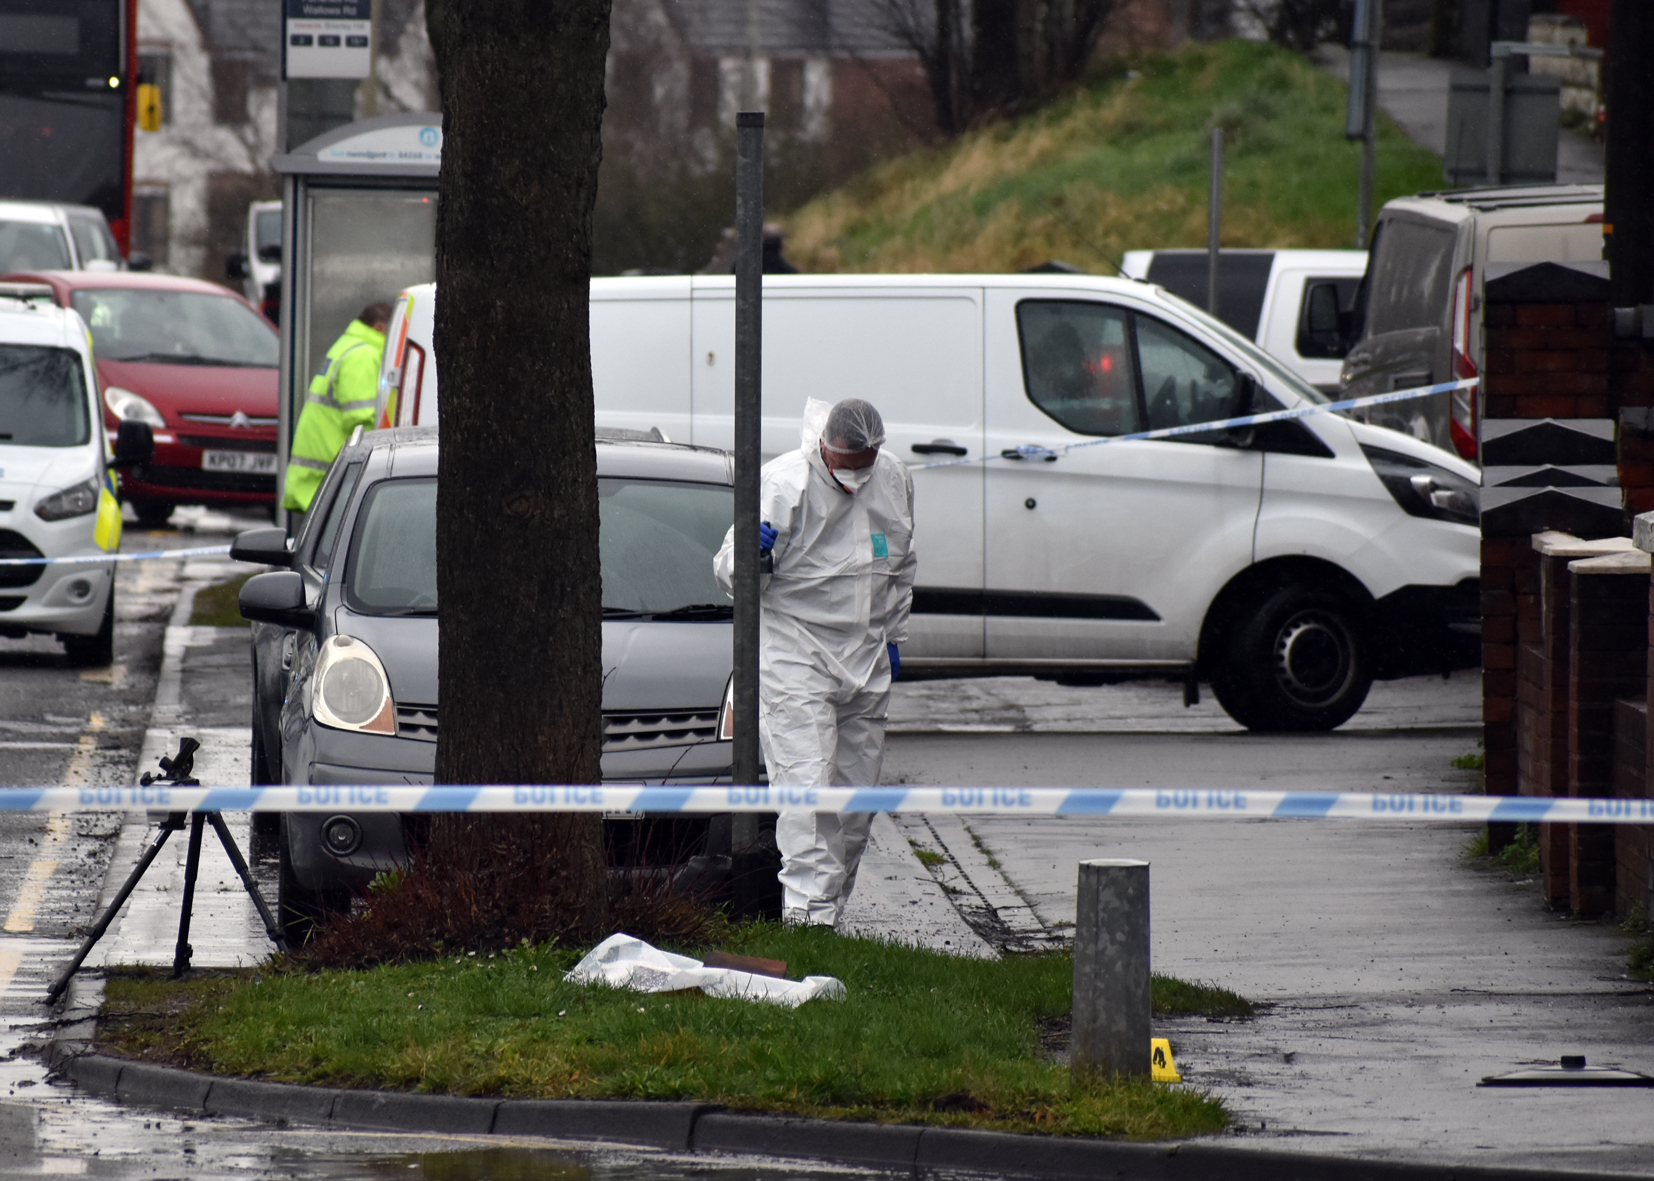 The scene of the double murder in Brierley Hill (Matthew Cooper/PA).